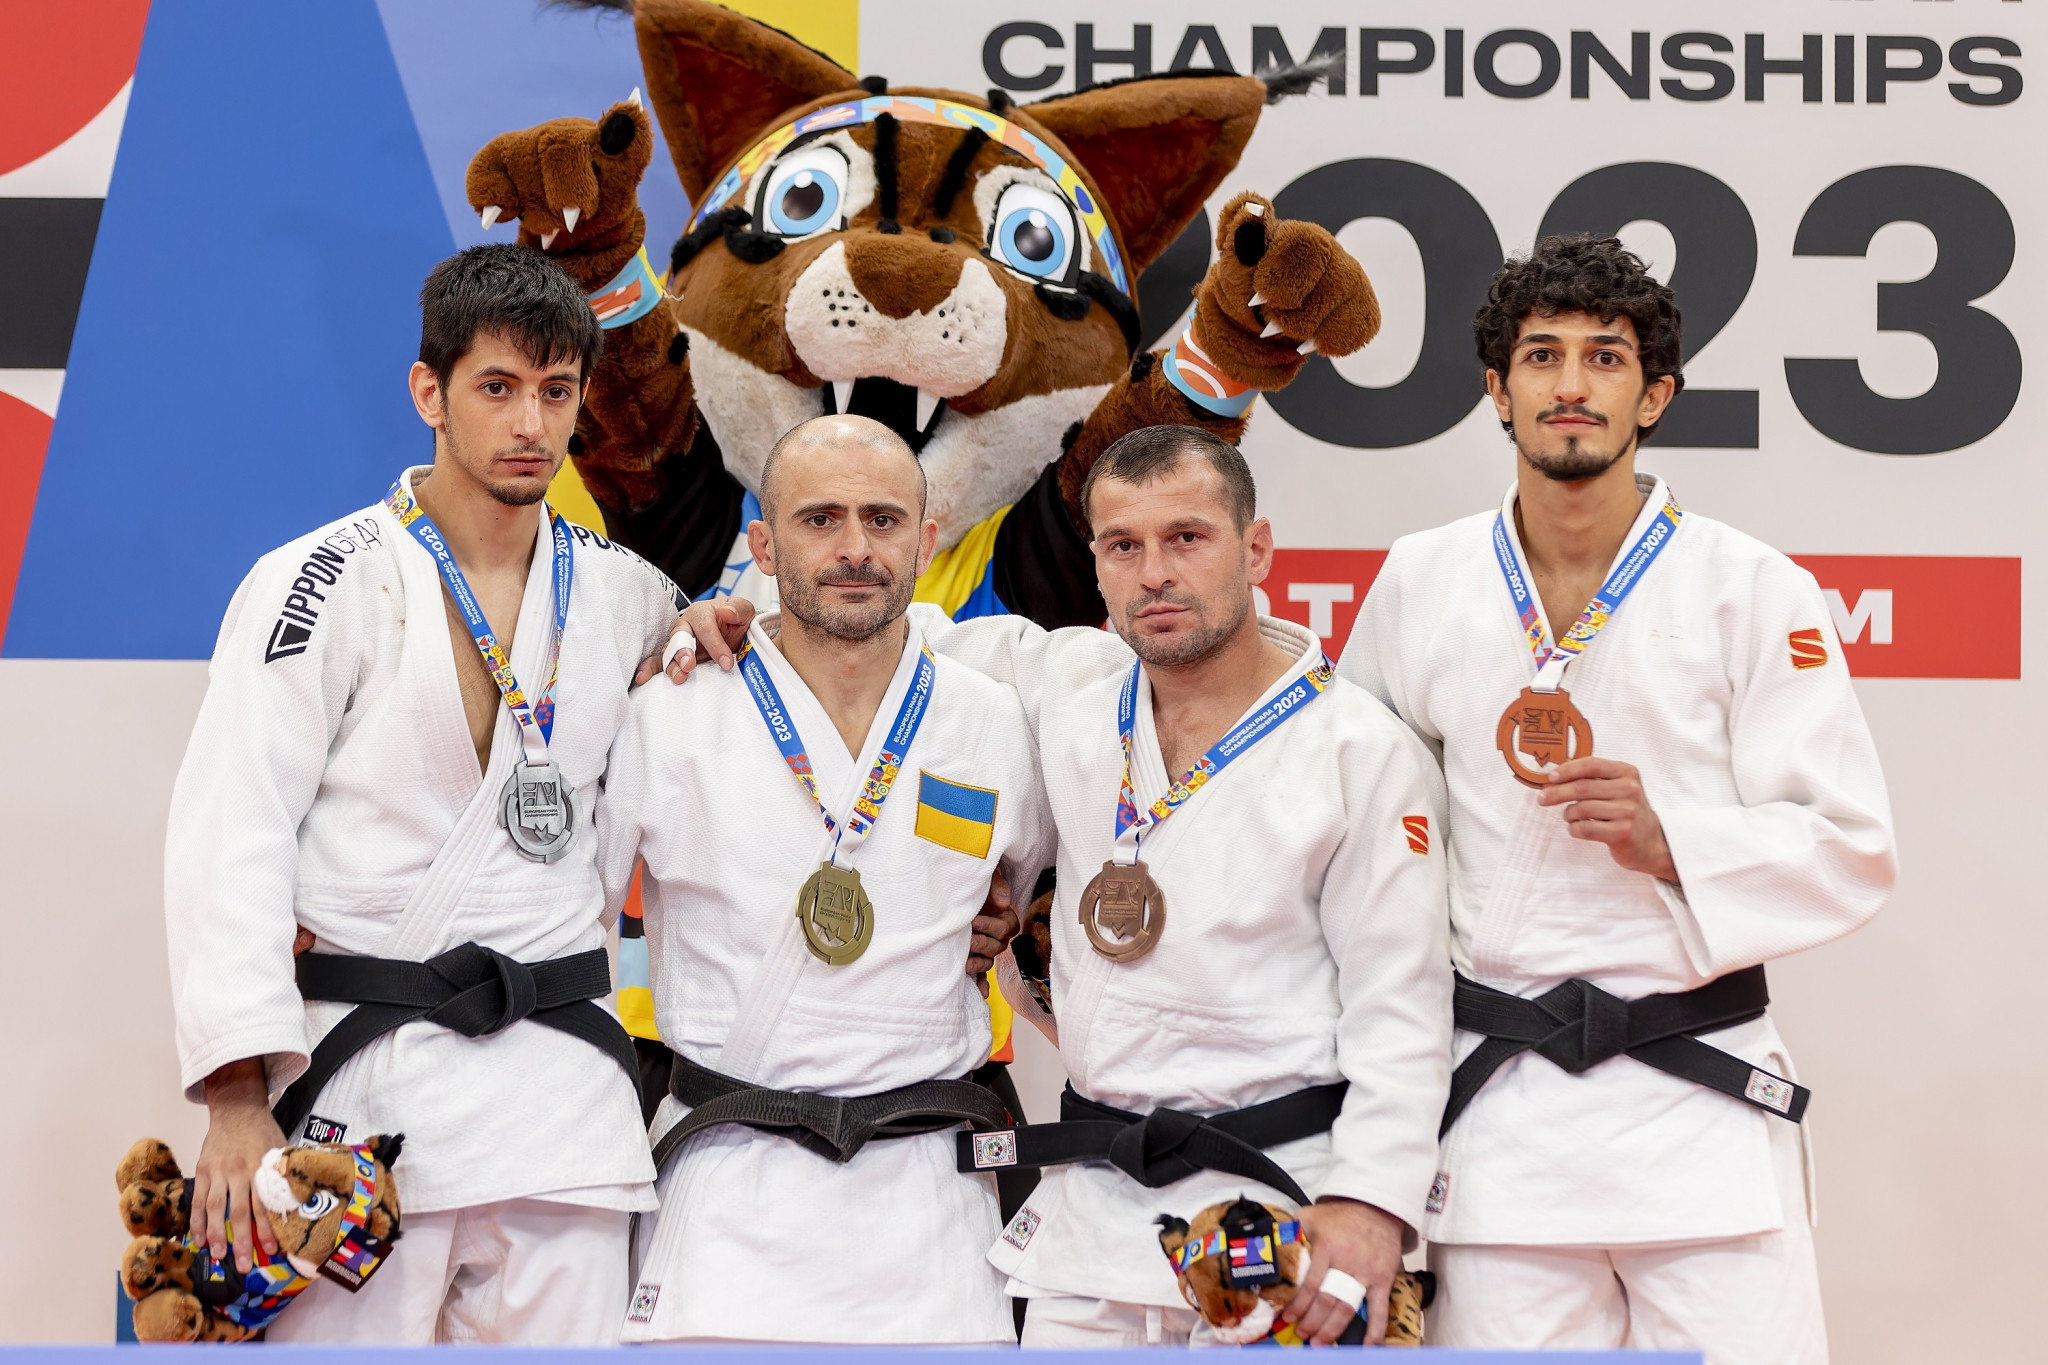 Davyd Khorava, second from right, stood at the top of the podium on a great first day for Ukraine ©EPC